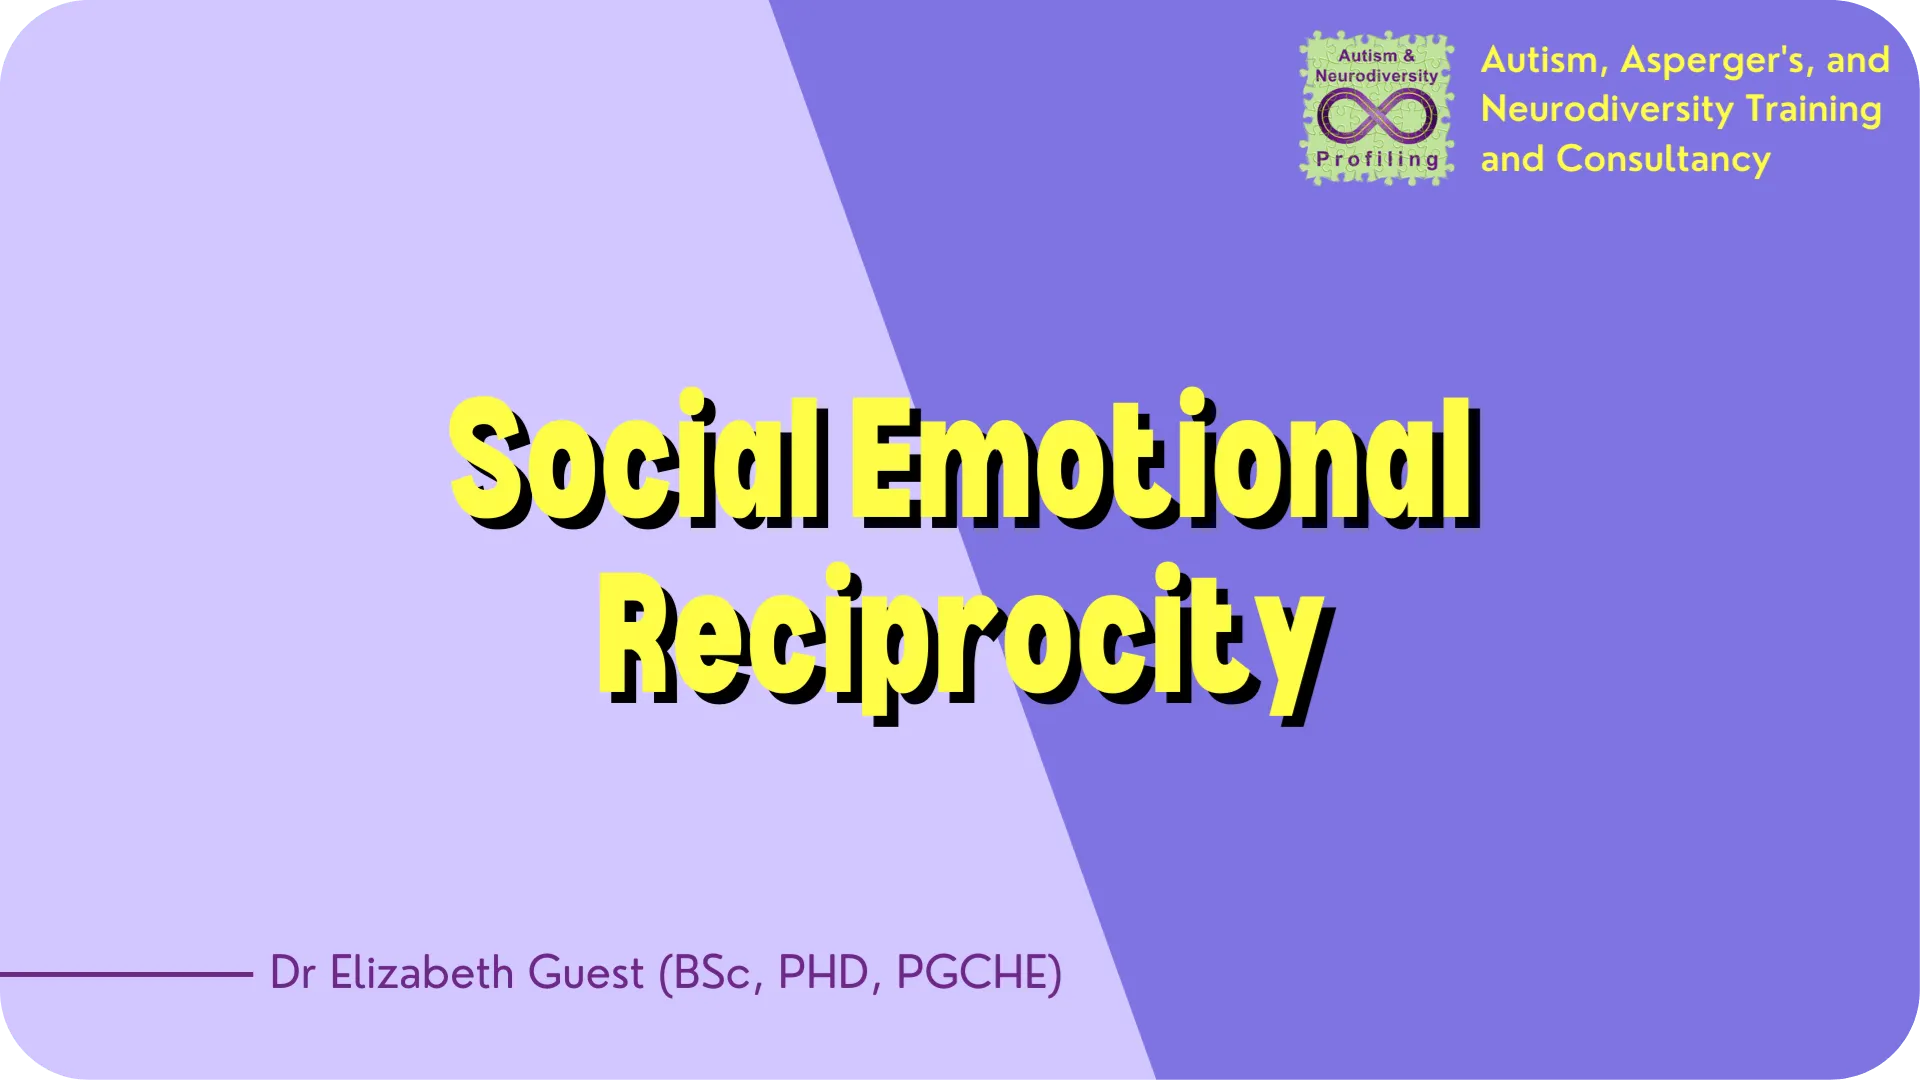 Aspiedent video thumbnail with the title of the video 'Social Emotional Reciprocity' on a purple background.